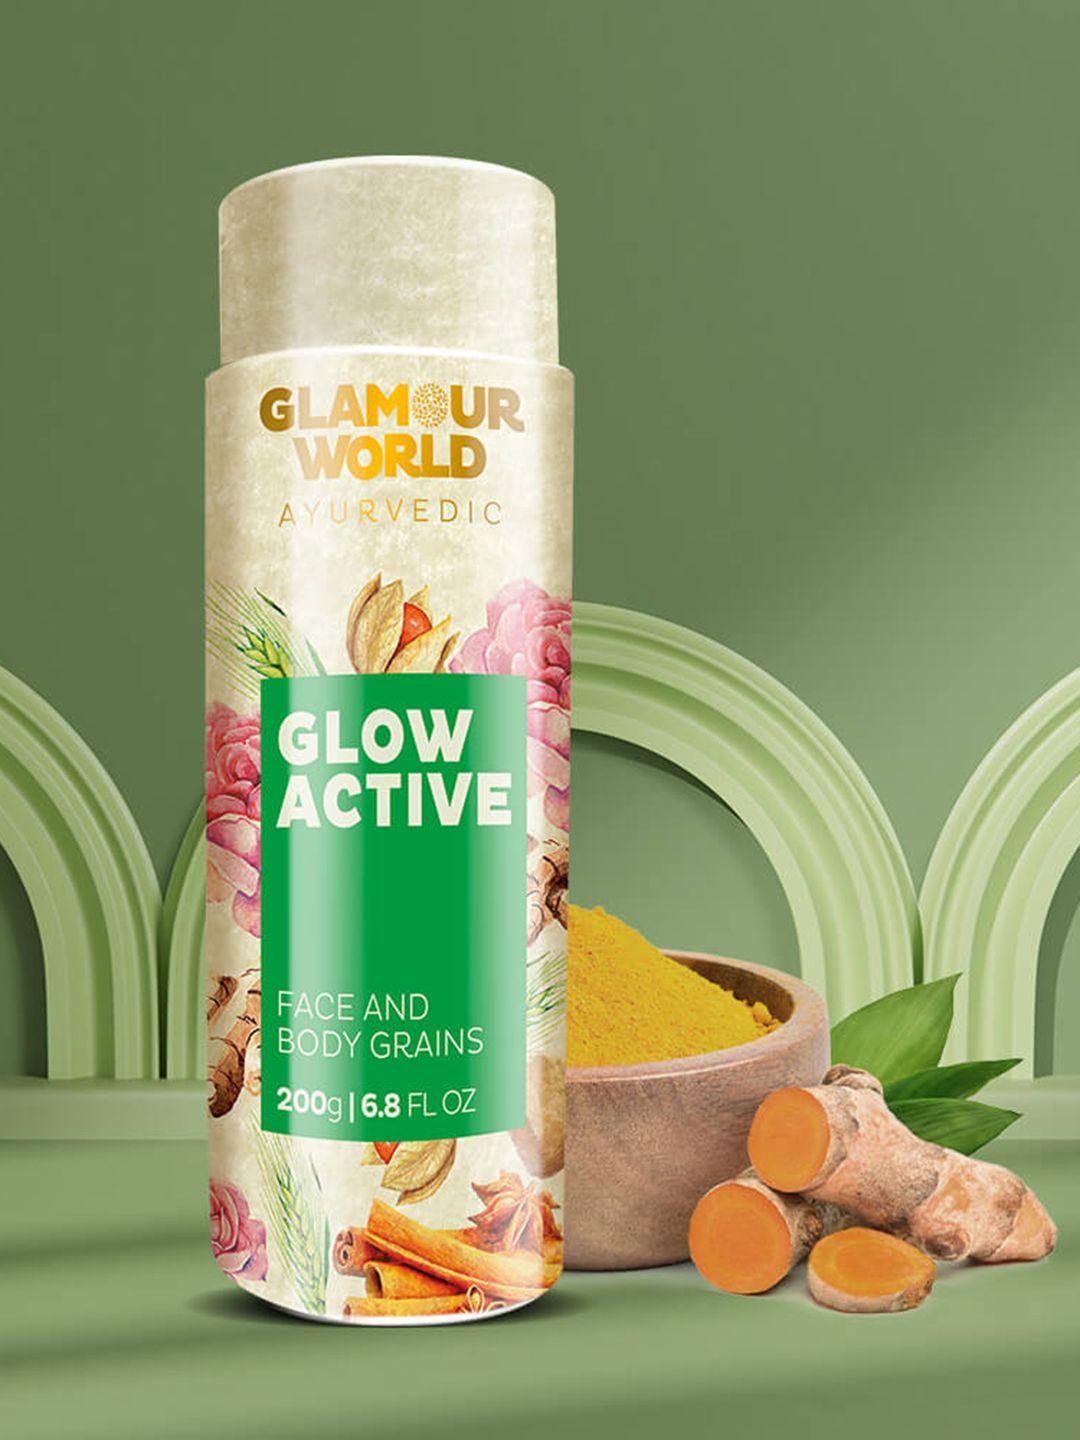 glamour world ayurvedic glow active face & body grains pack - 200g